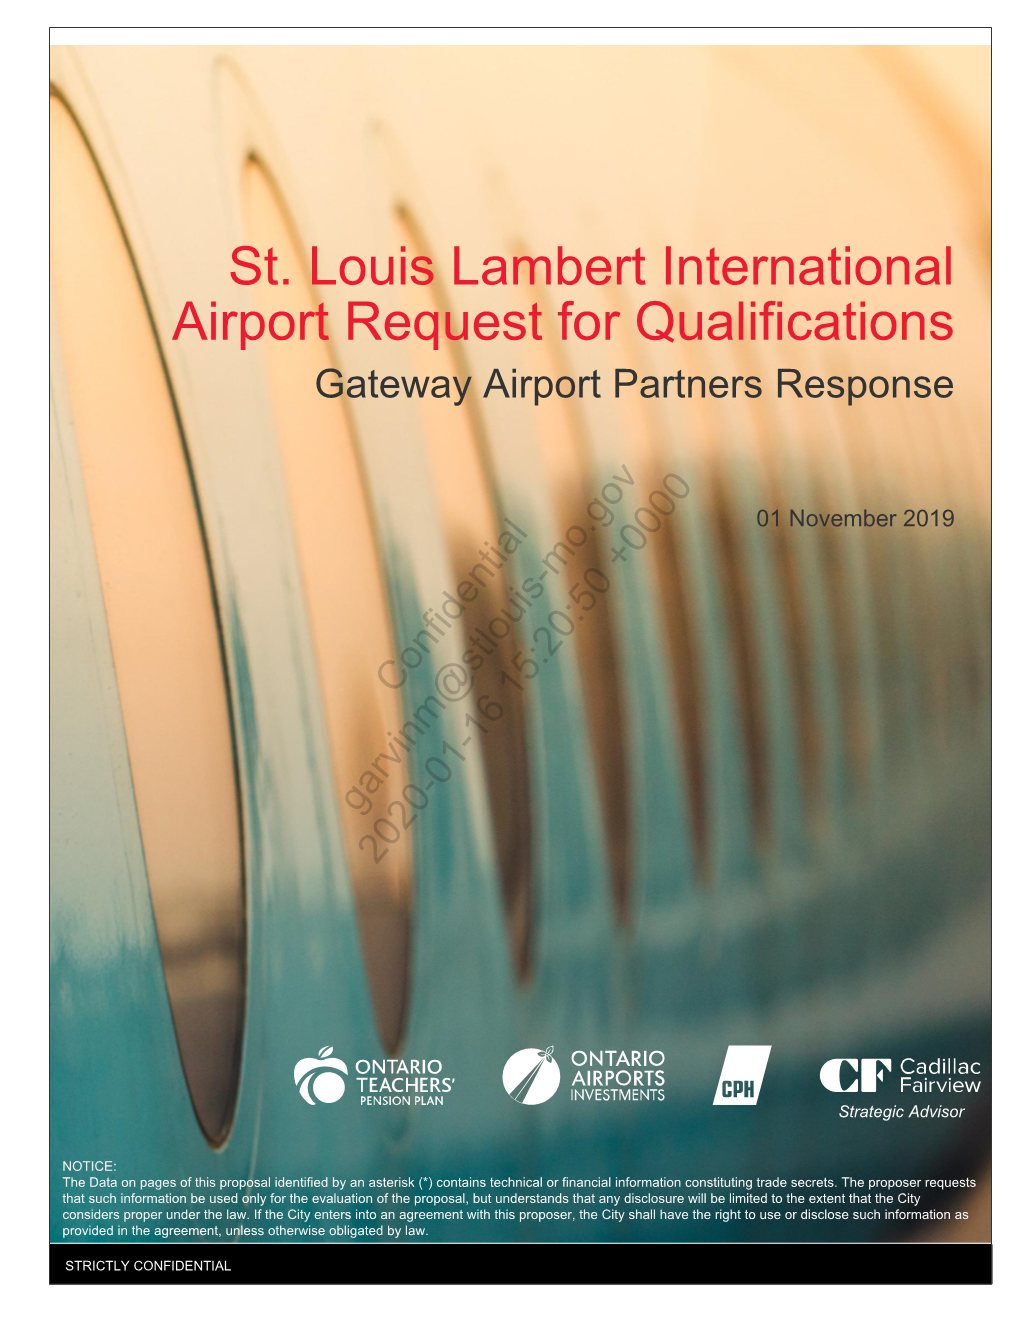 St. Louis Lambert International Airport Request for Qualifications Gateway Airport Partners Response